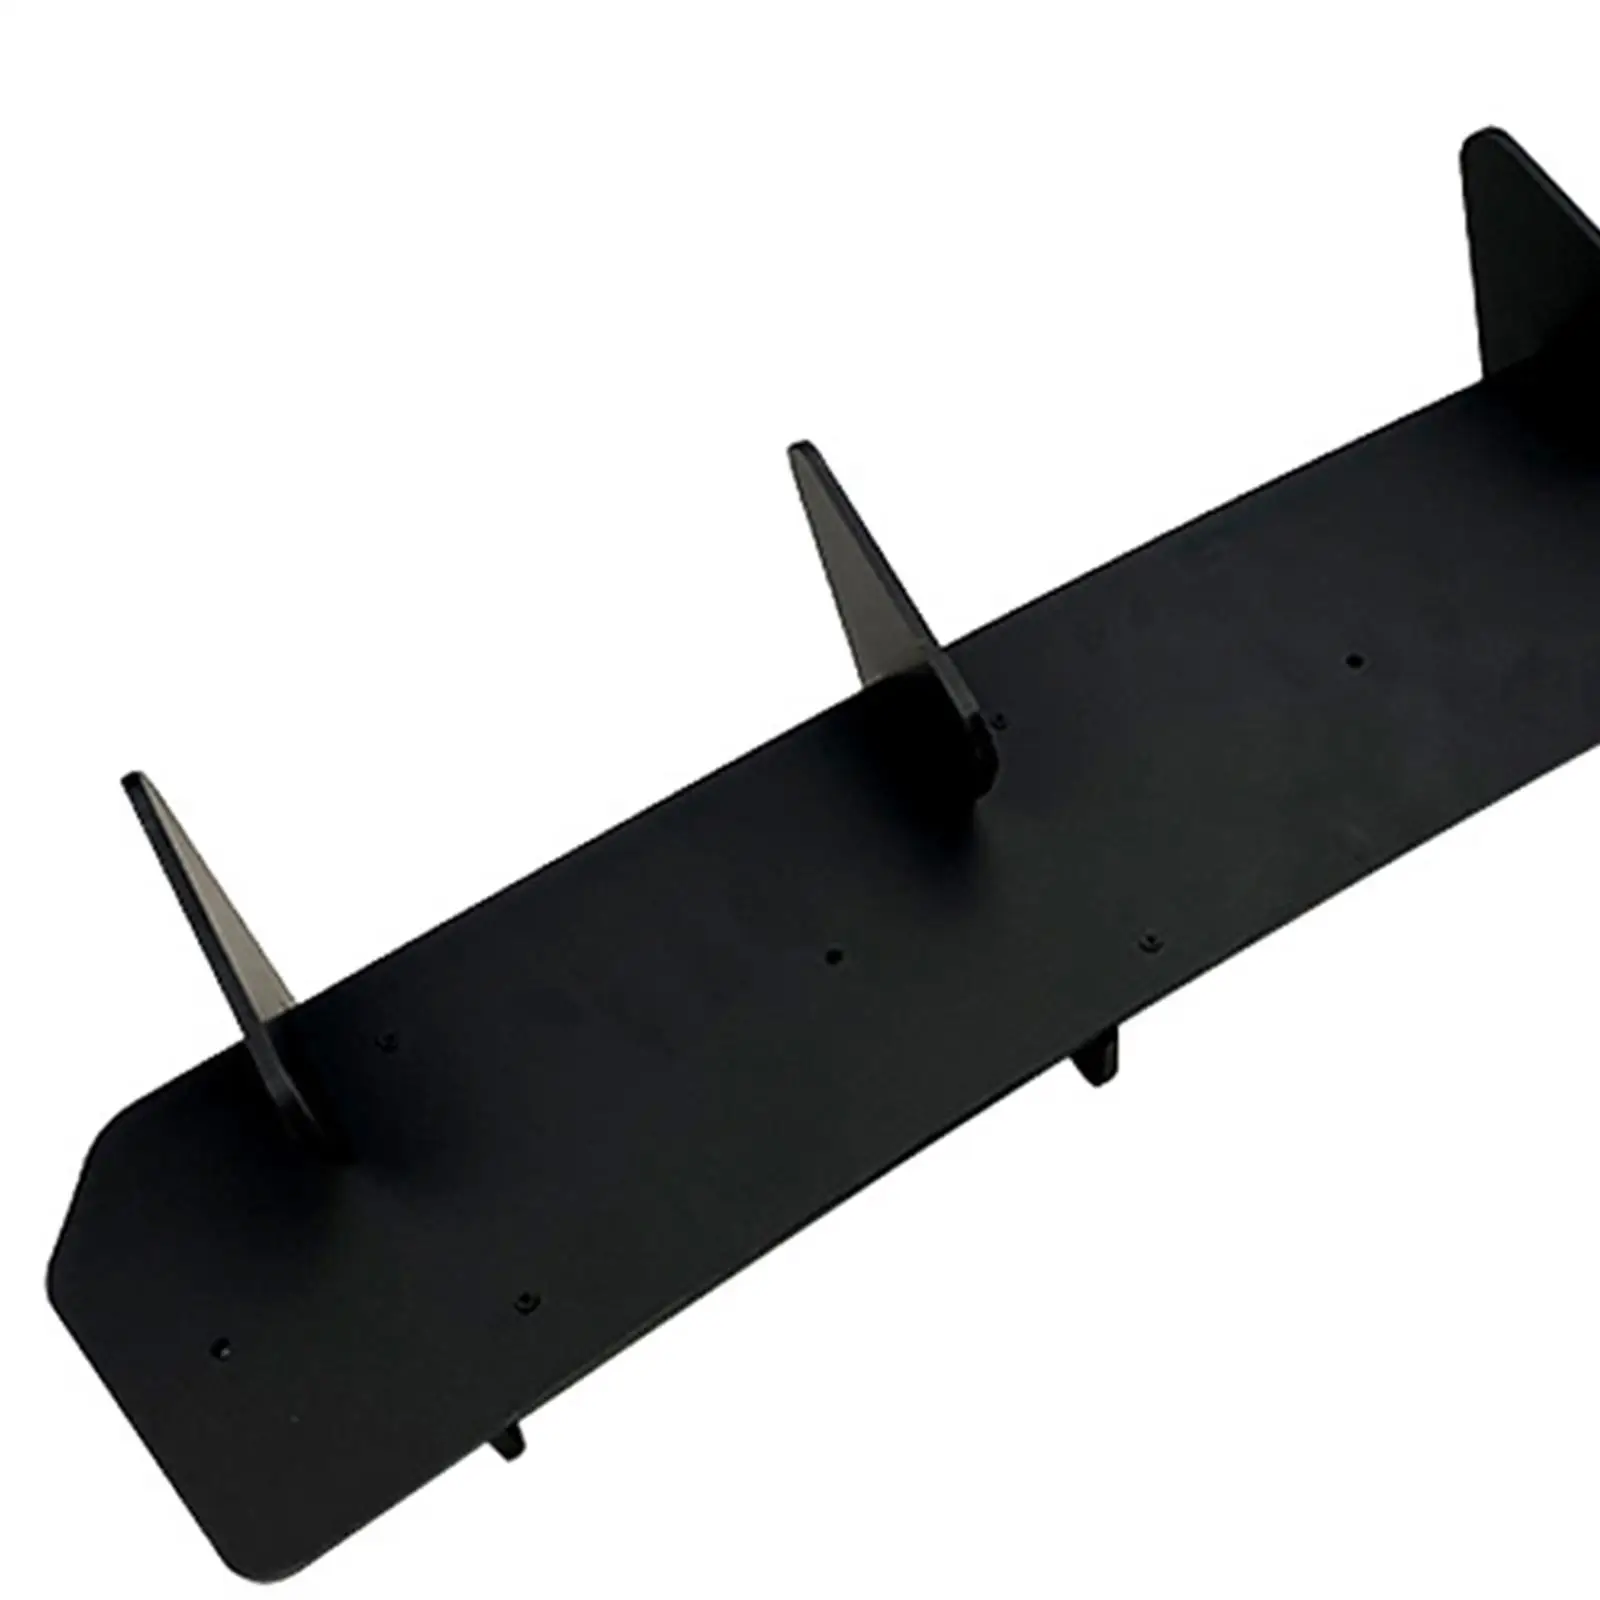 Automobile Rear Bumper Diffuser with Side splitters for VW Golf MK7.5 GTI Easily Install Lightweight Car Accessories